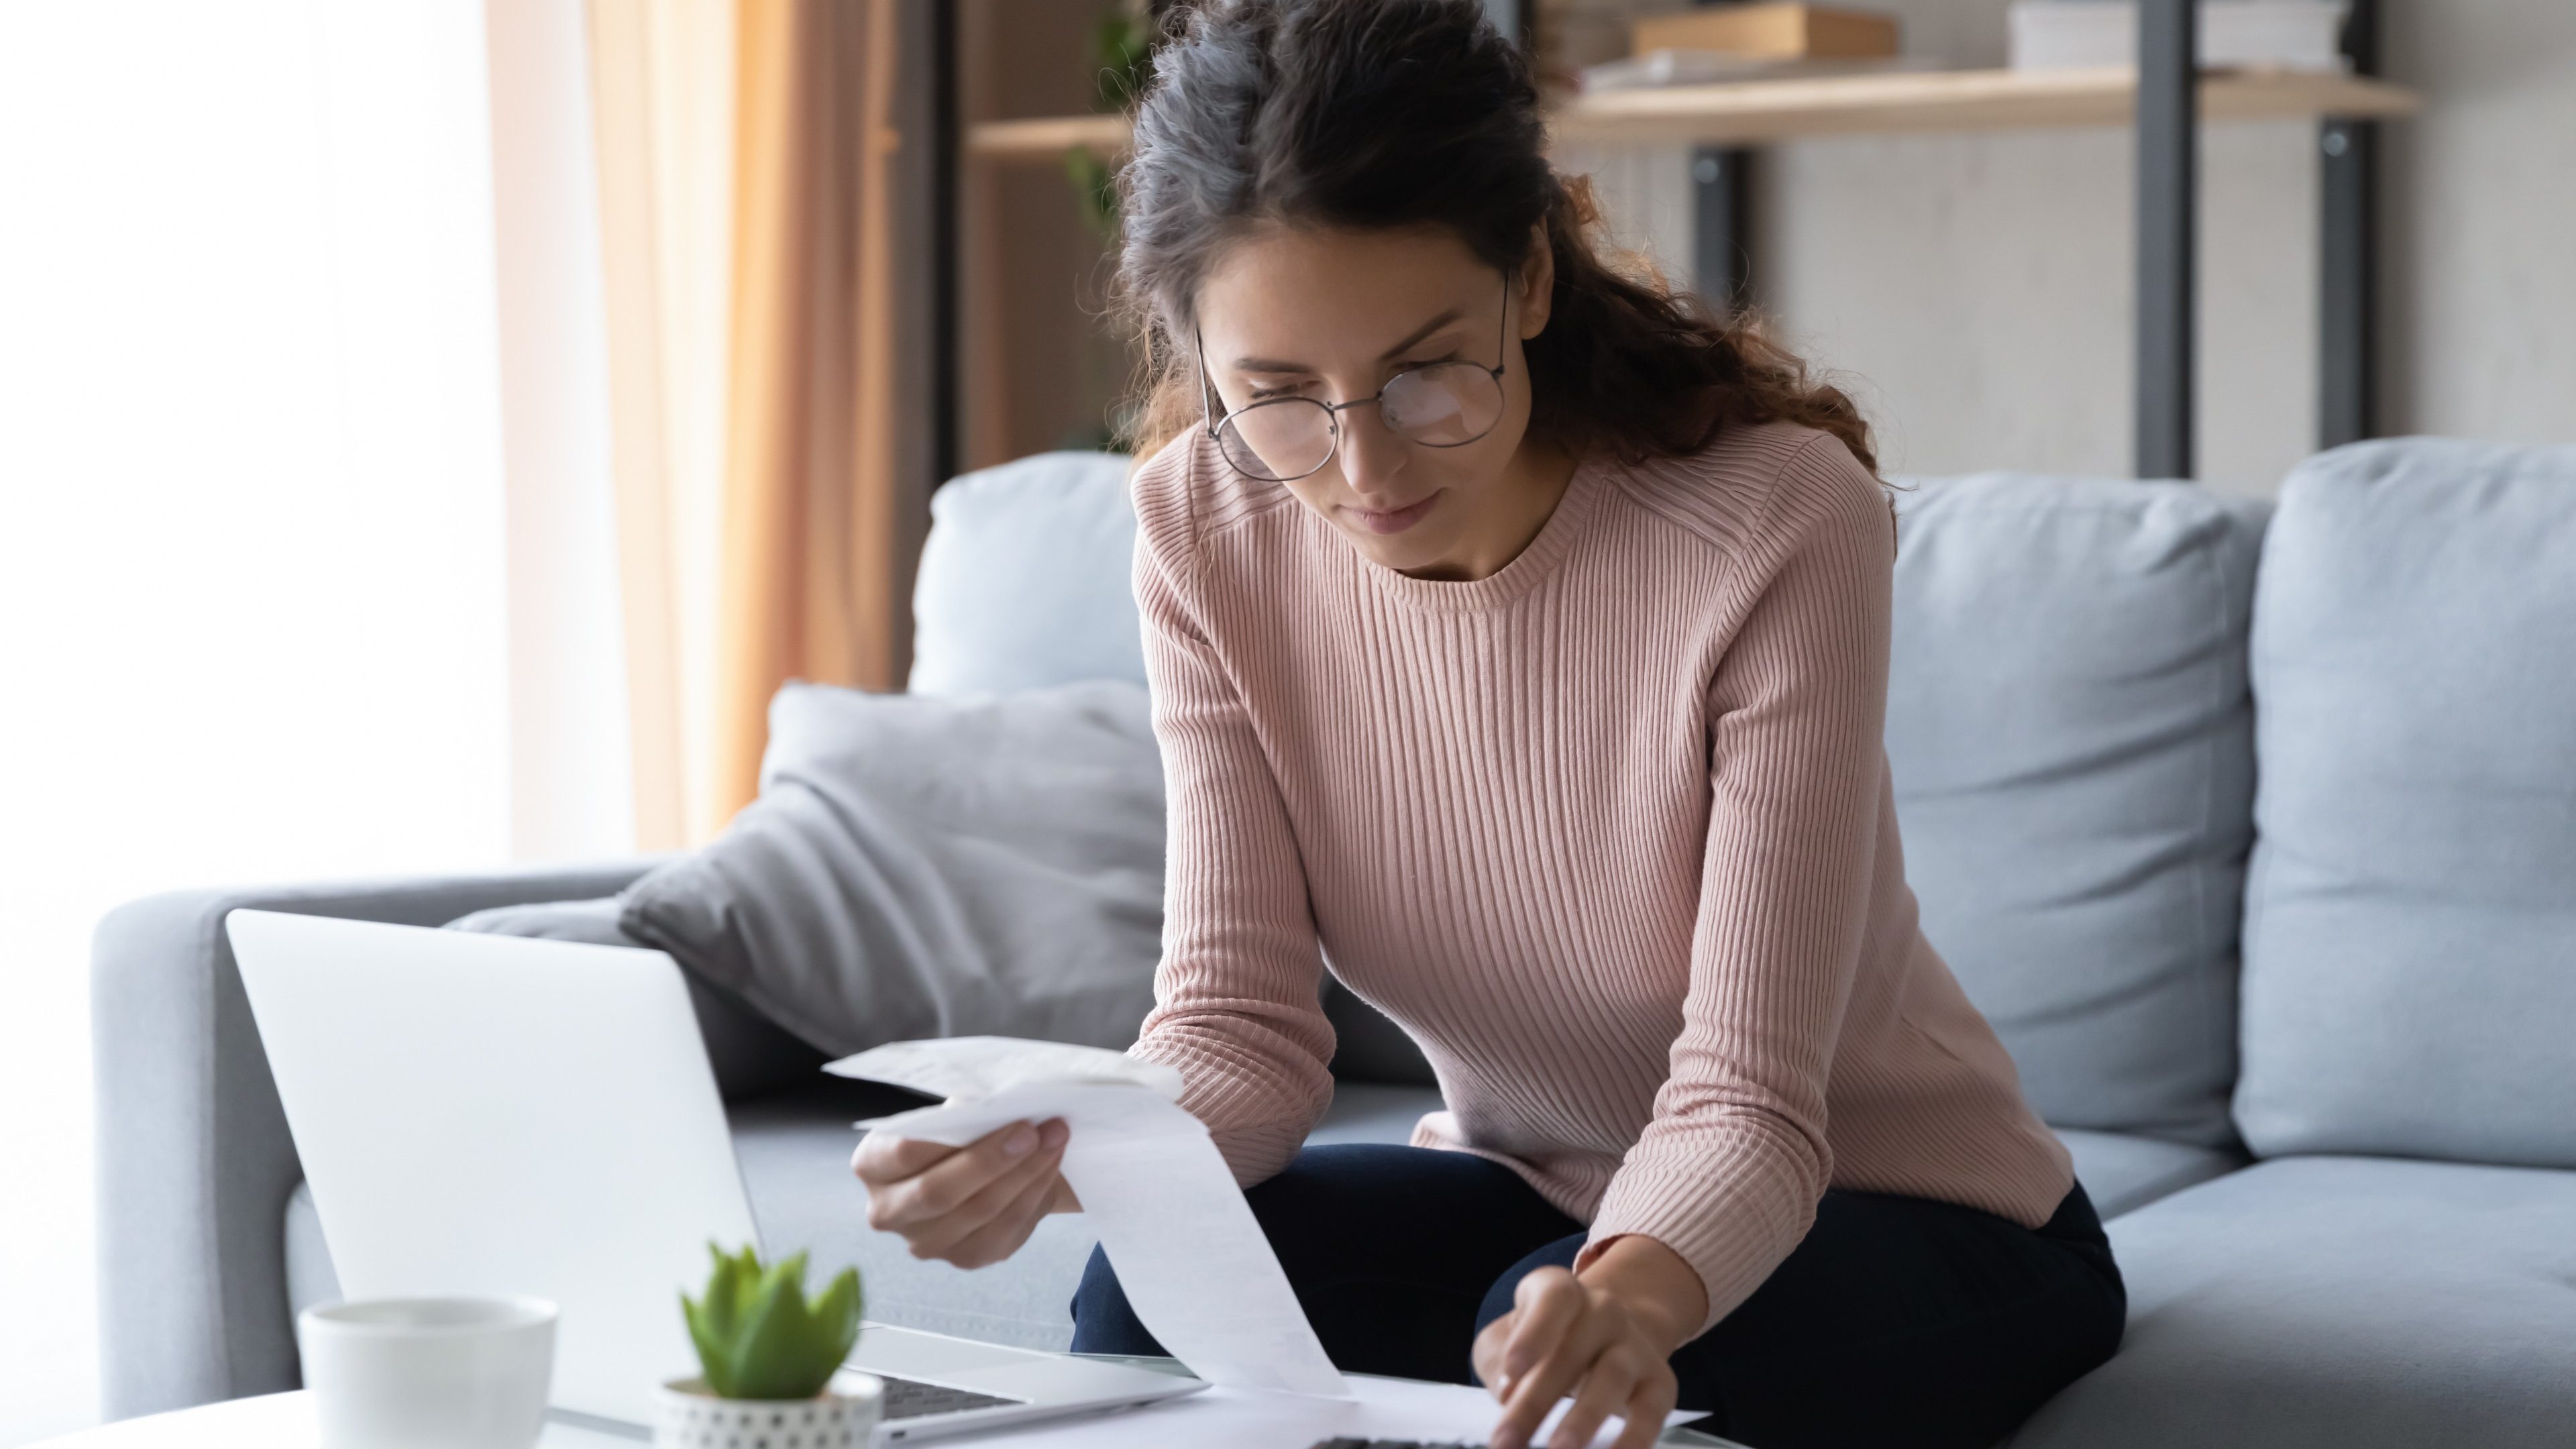 Focused smart millennial woman in eyeglasses busy with financial paperwork, calculating utility bills or taxes, managing monthly household budget or planning expenditures, bookkeeping concept.